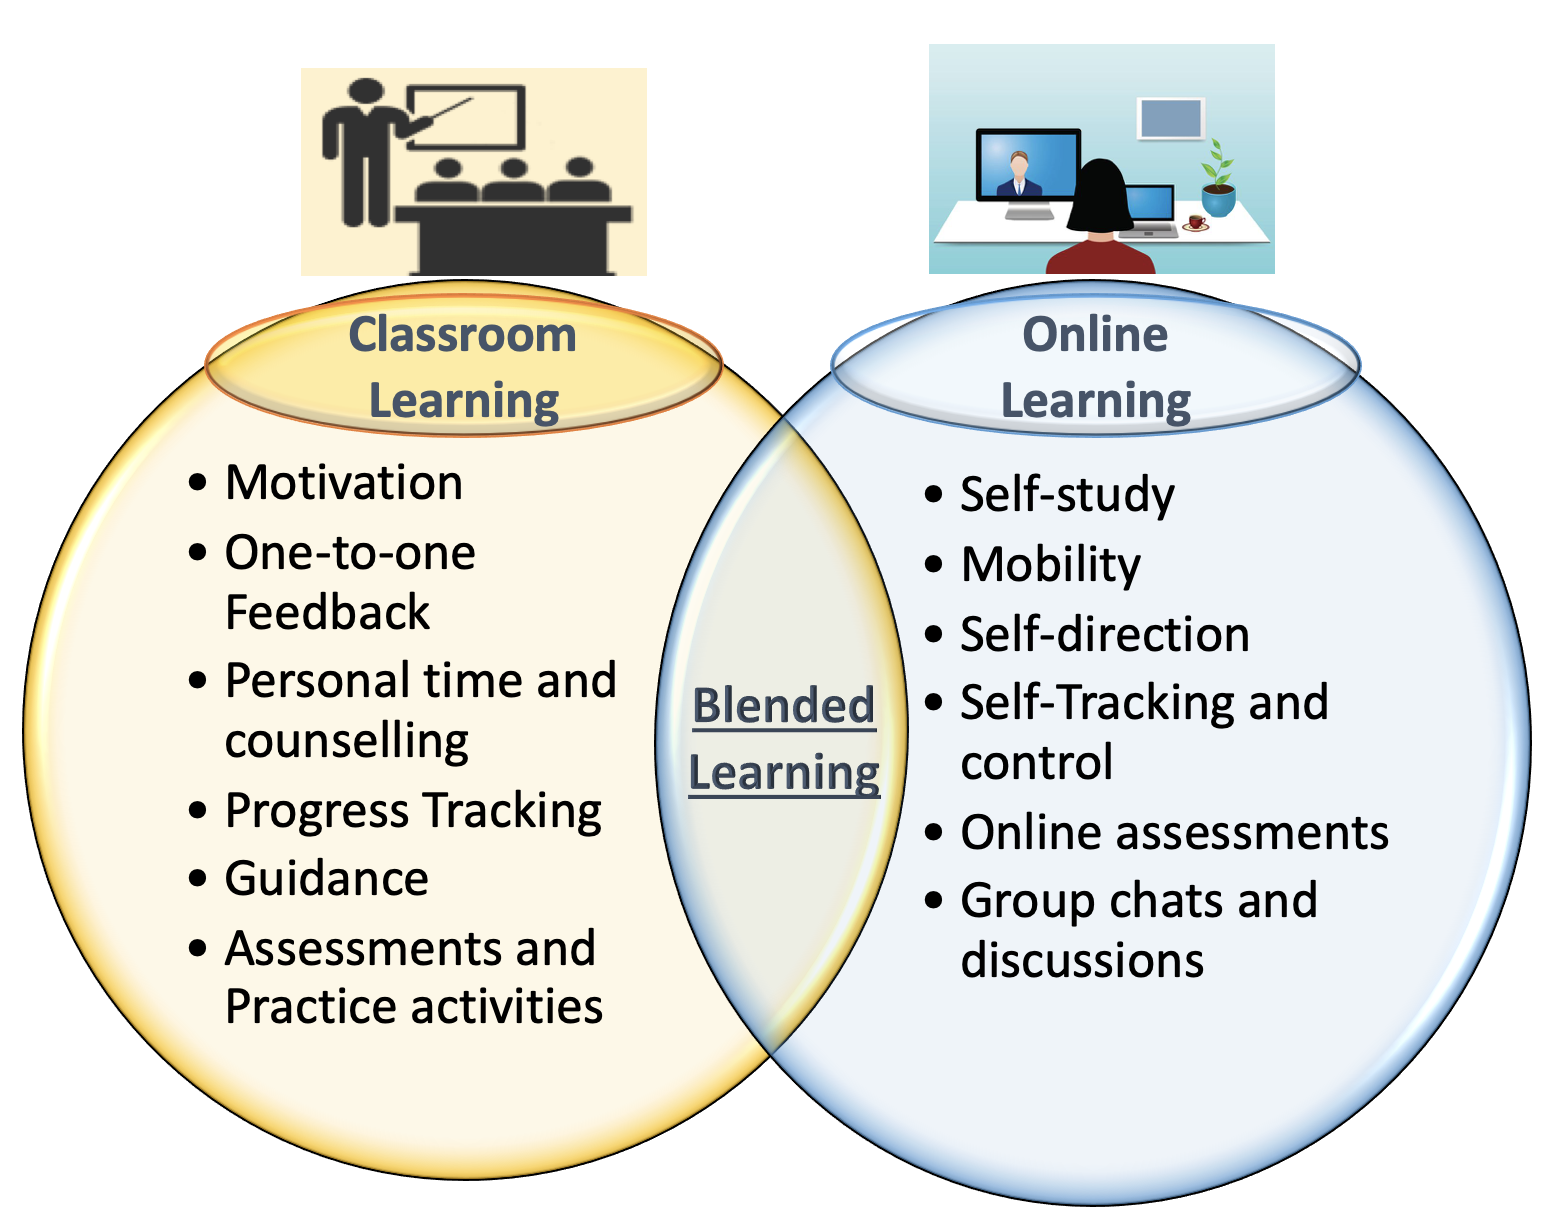 research topic about blended learning